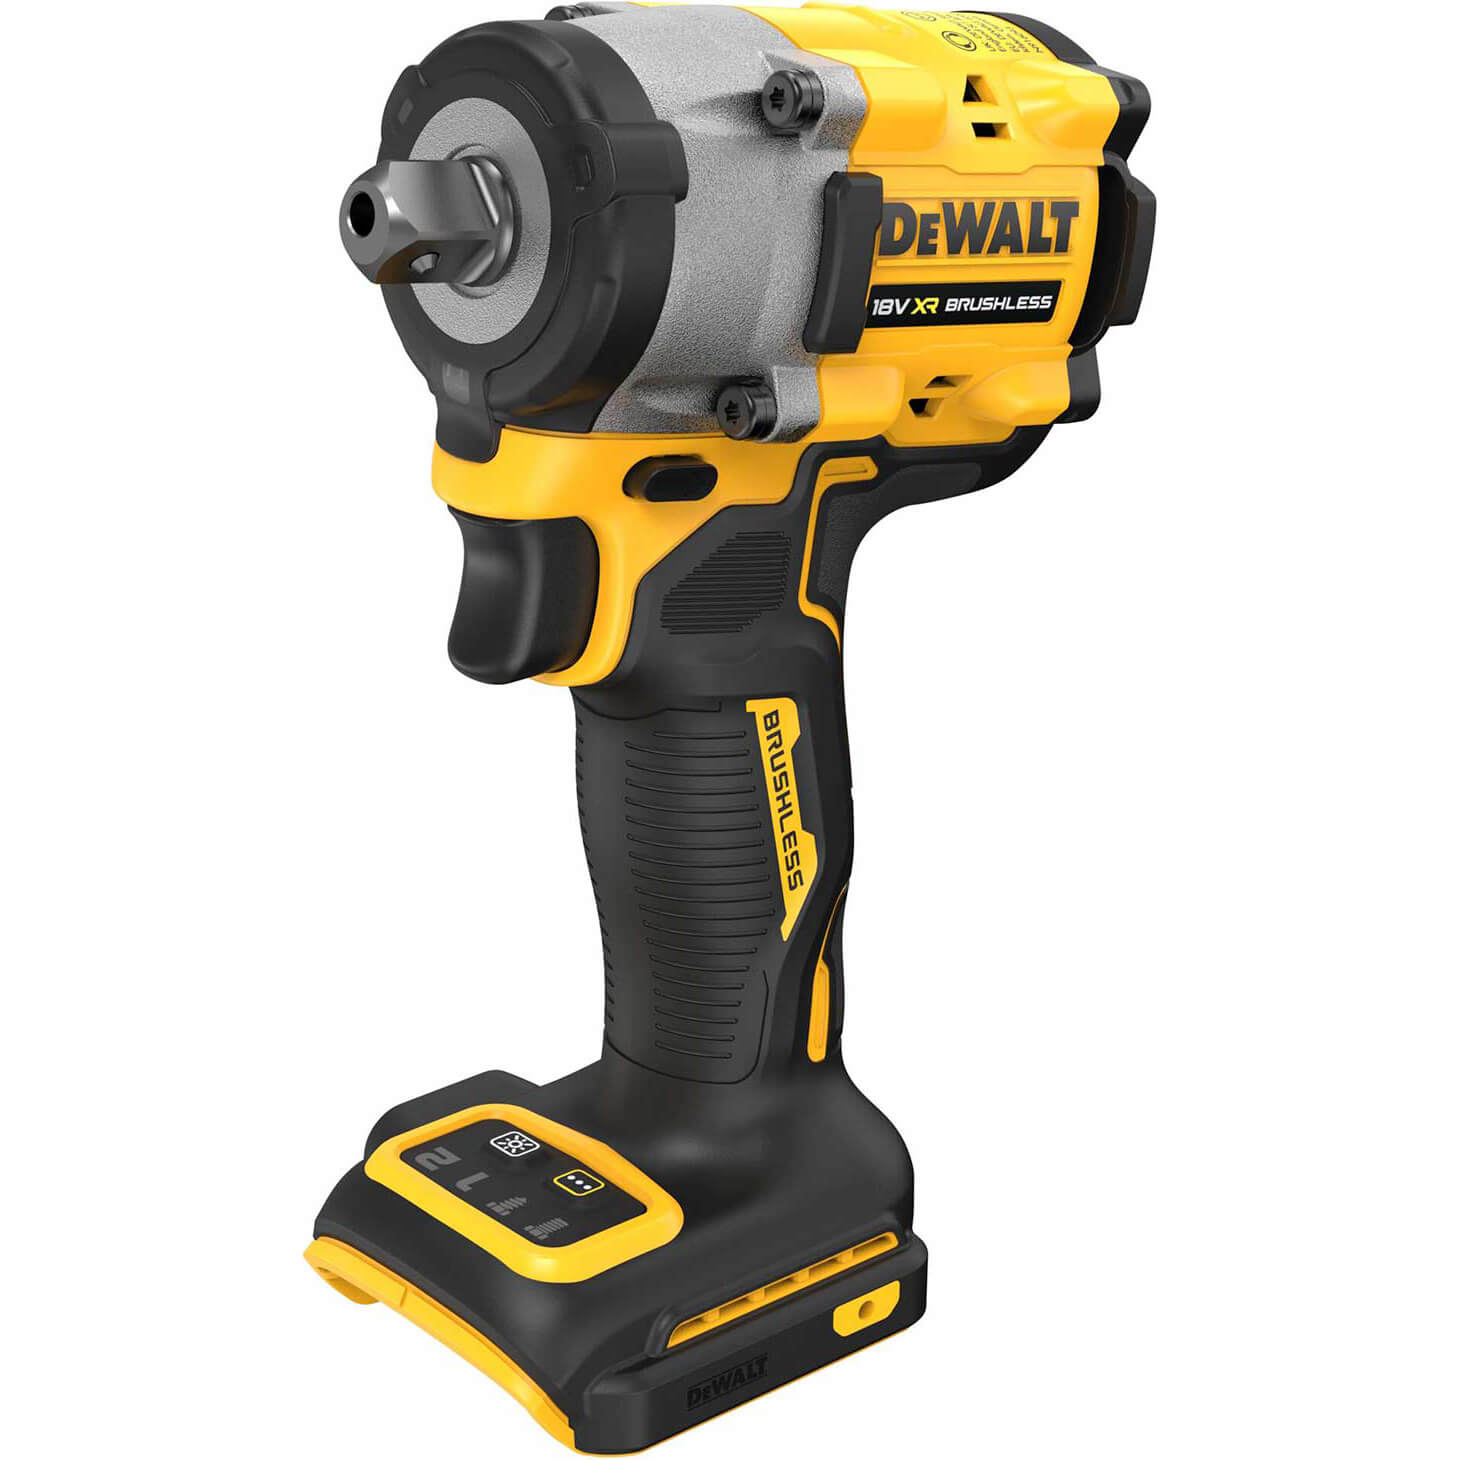 Image of DeWalt DCF922 18v XR Cordless Brushless 1/2" Compact Impact Wrench No Batteries No Charger No Case